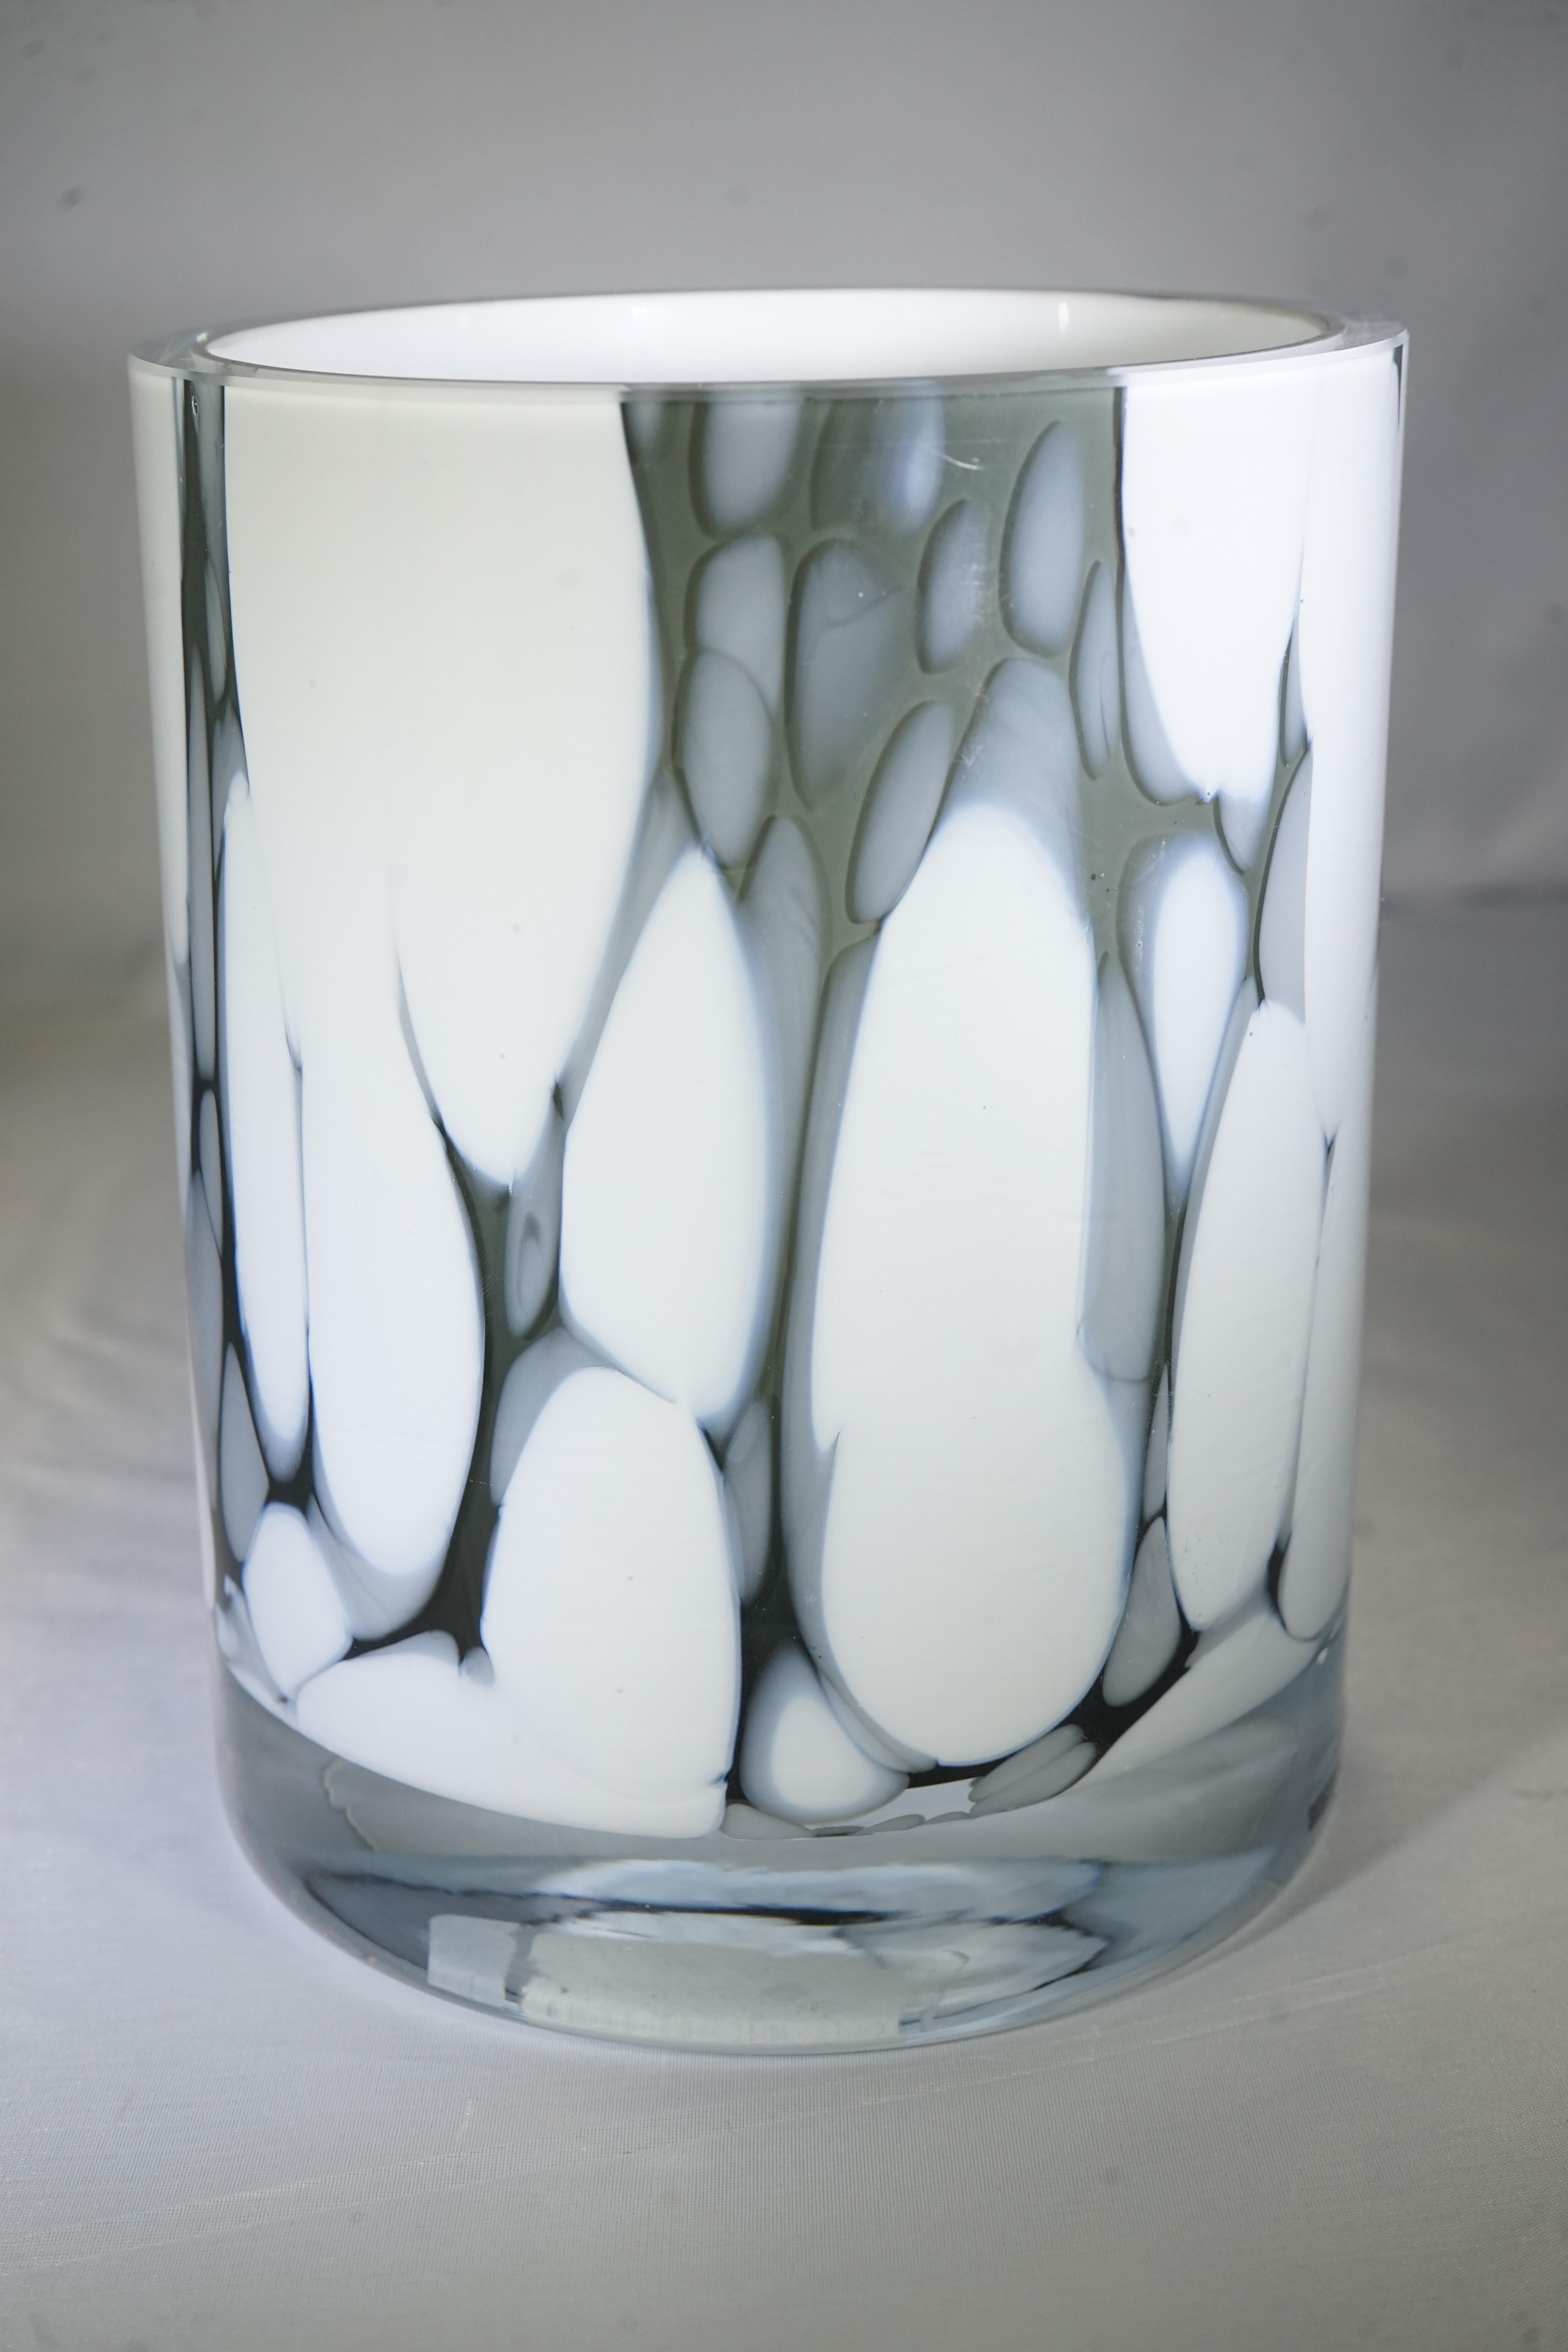 Contemporary black and white large size Arabescato glass hurricane lamp by Skogsberg & Smart. Featuring Italian marble inspired design, no two hurricane lamps are alike.